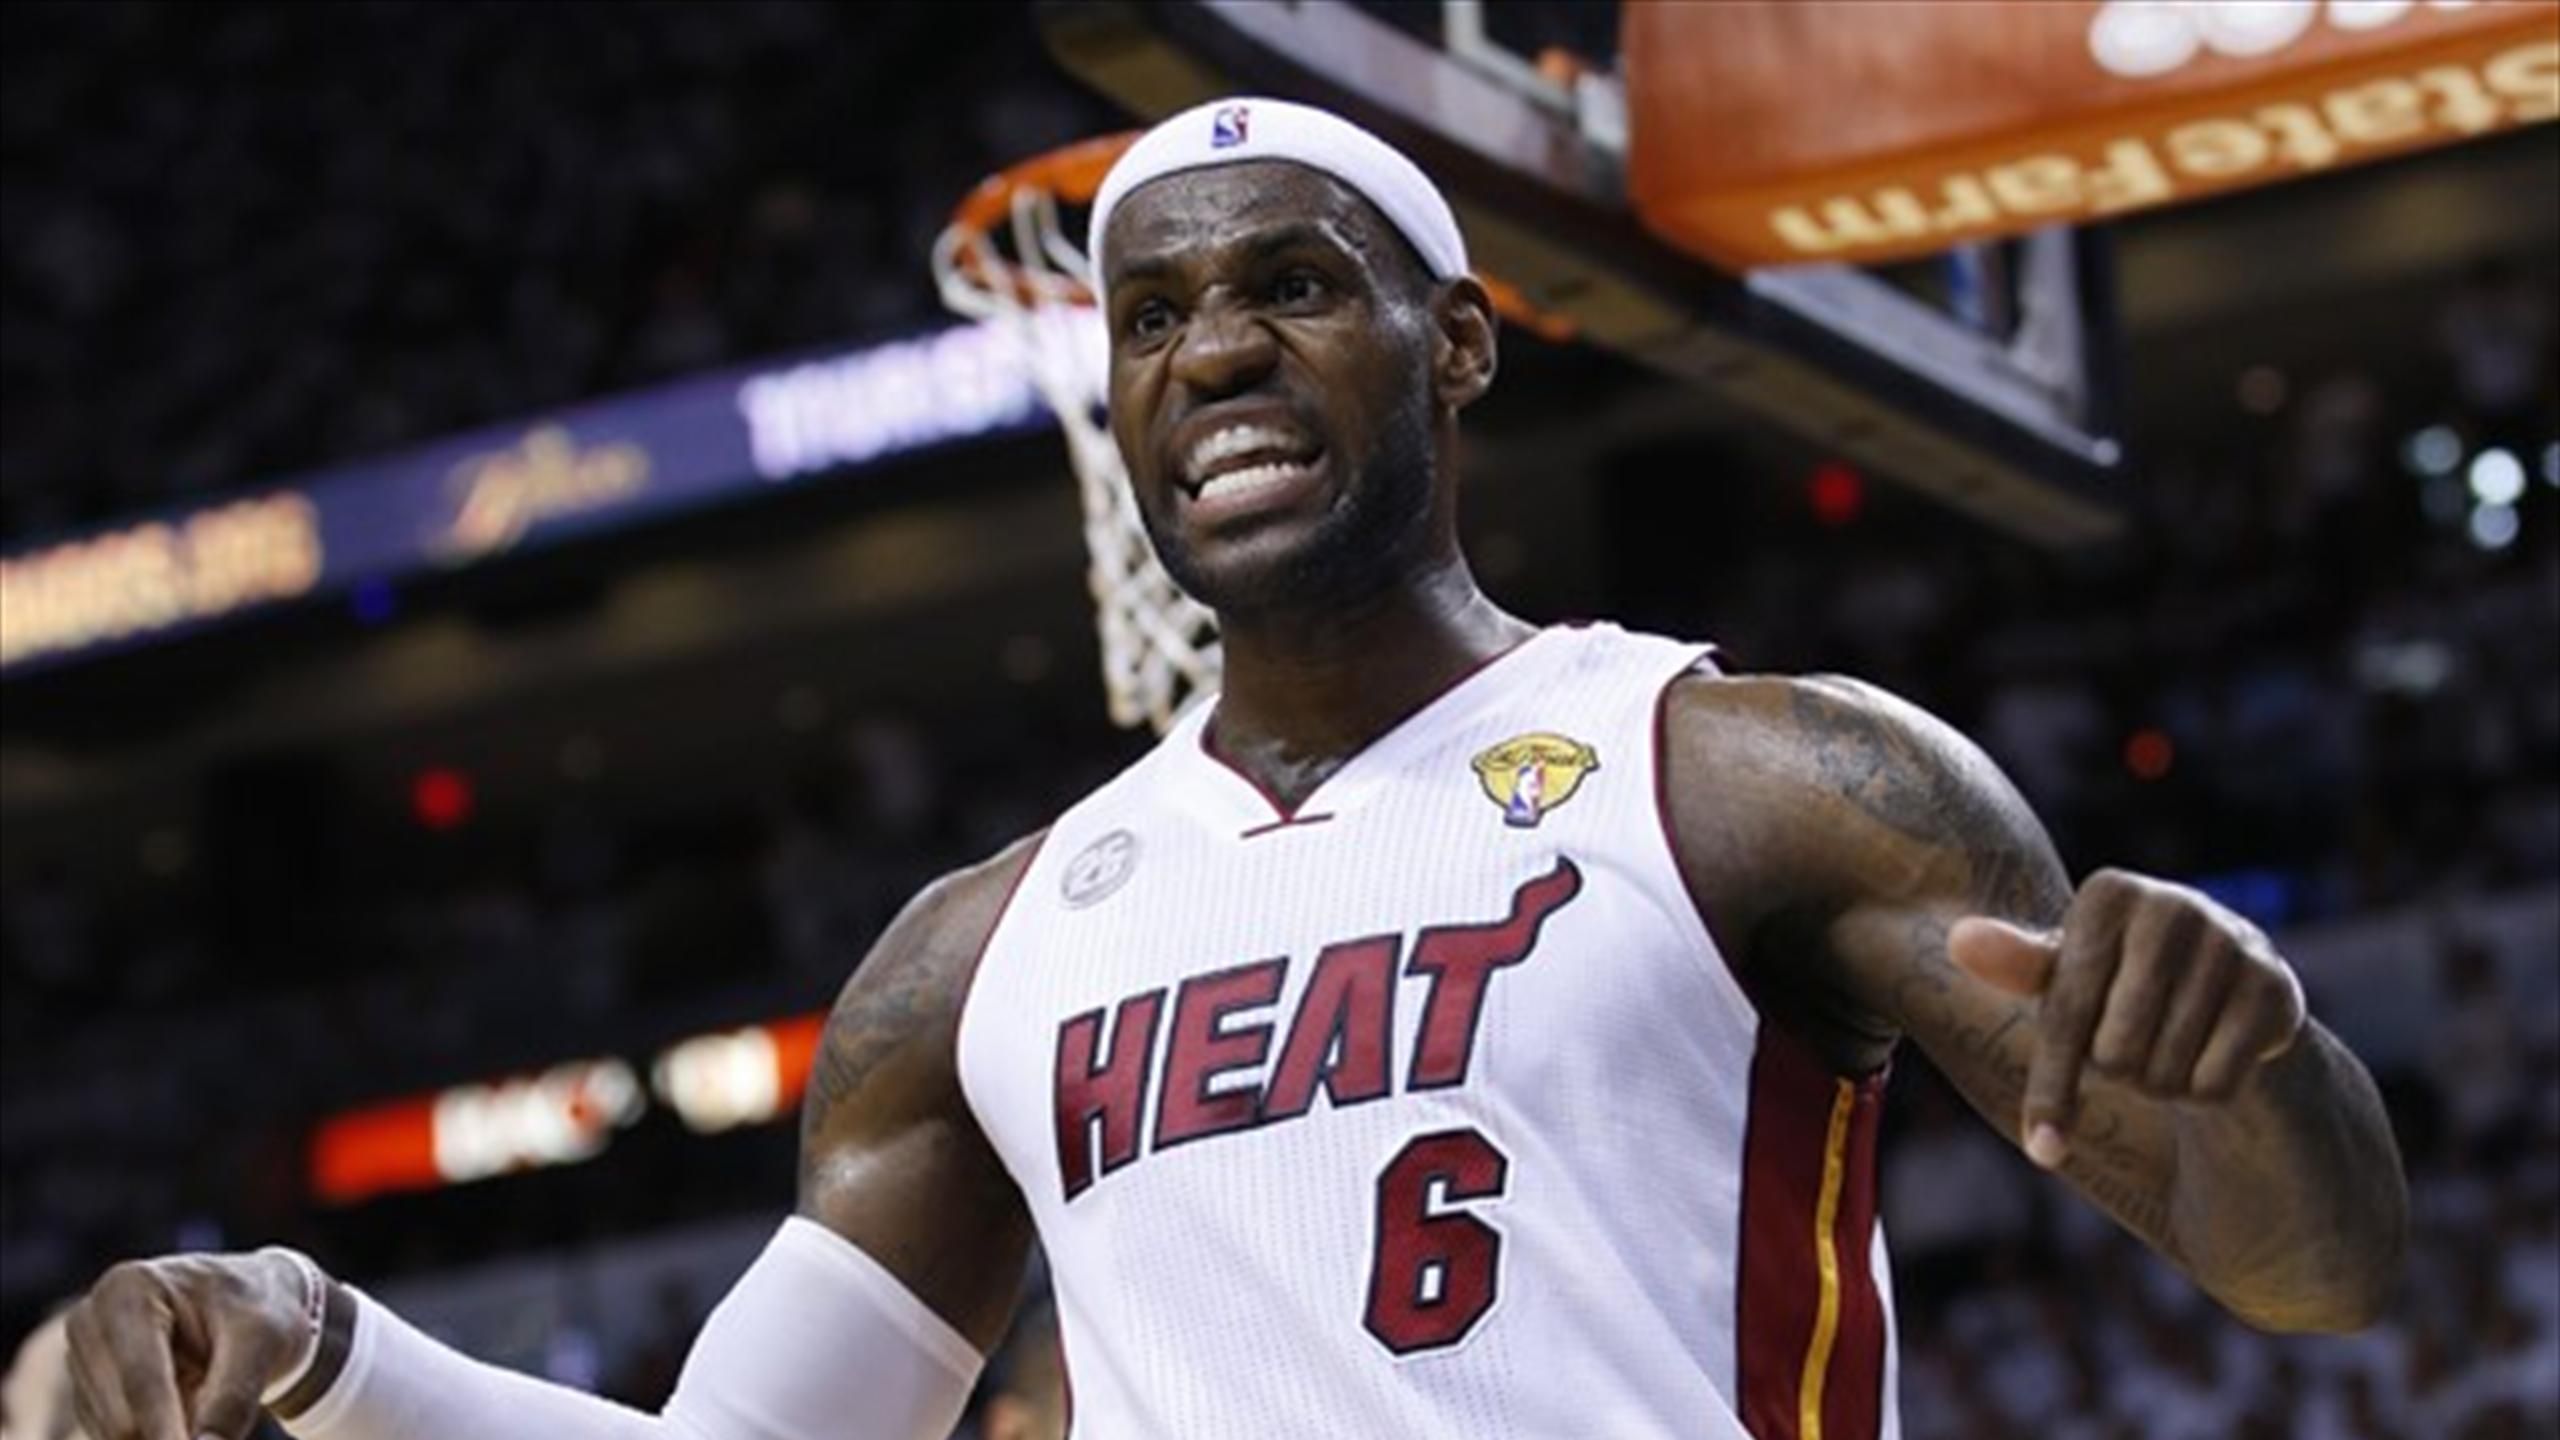 LeBron leads Heat to second straight title, Basketball